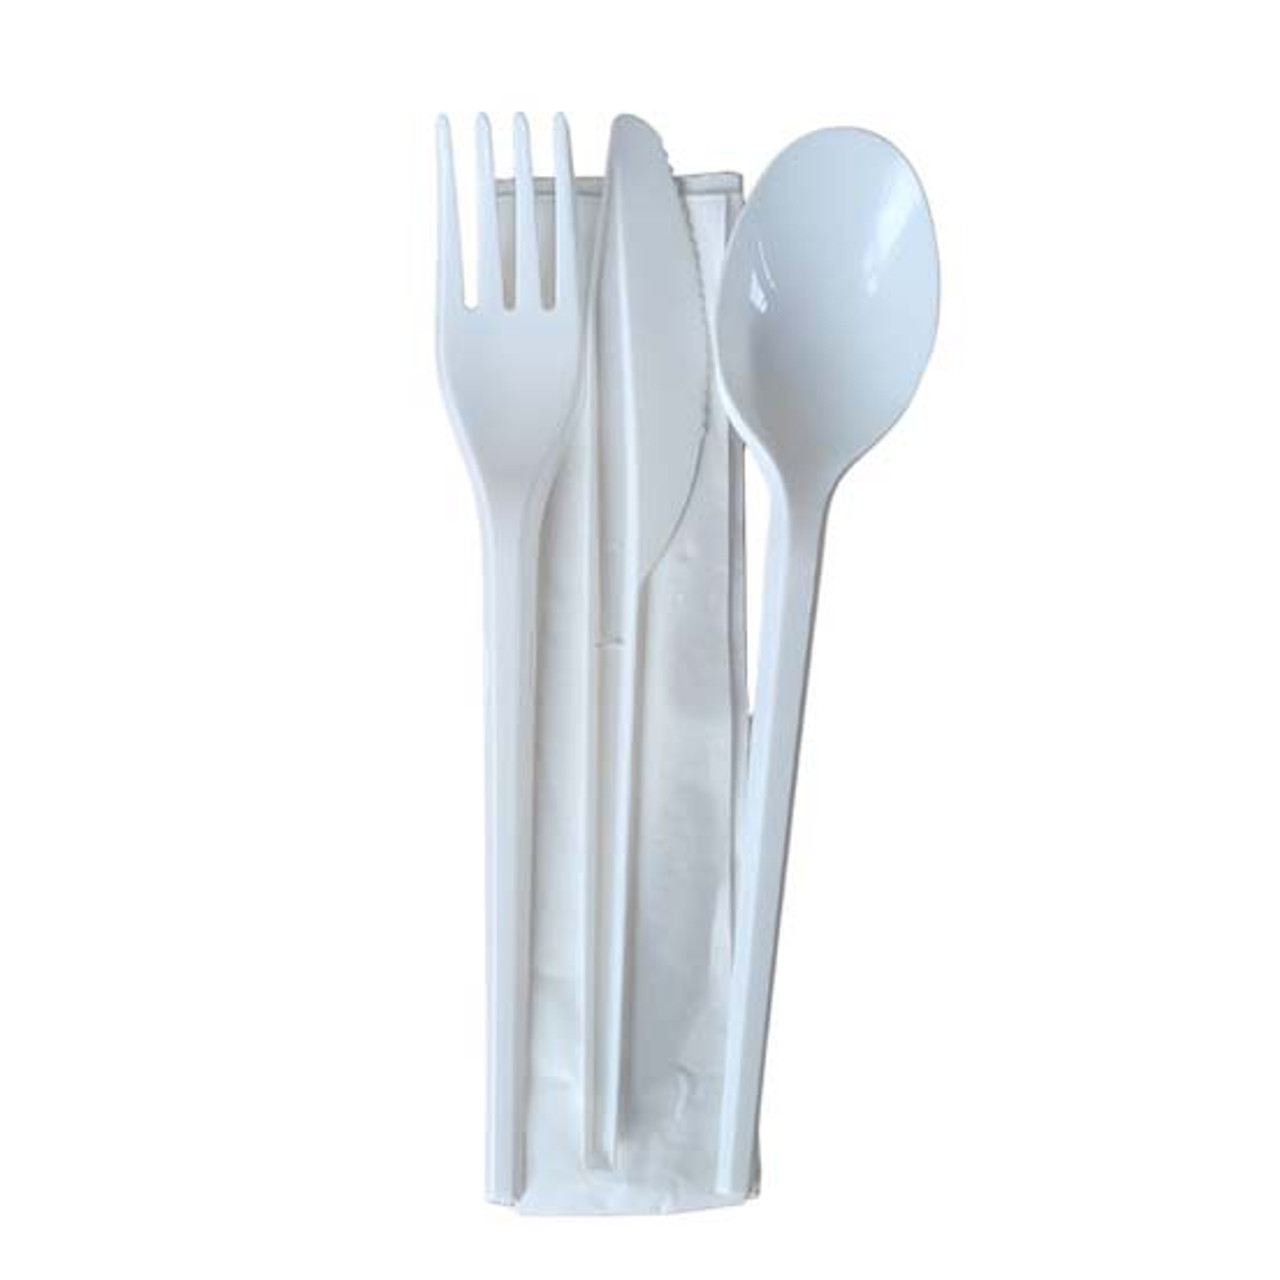 White Plastic Wrapped Cutlery Fork Knife Spoon Napkin Packs 